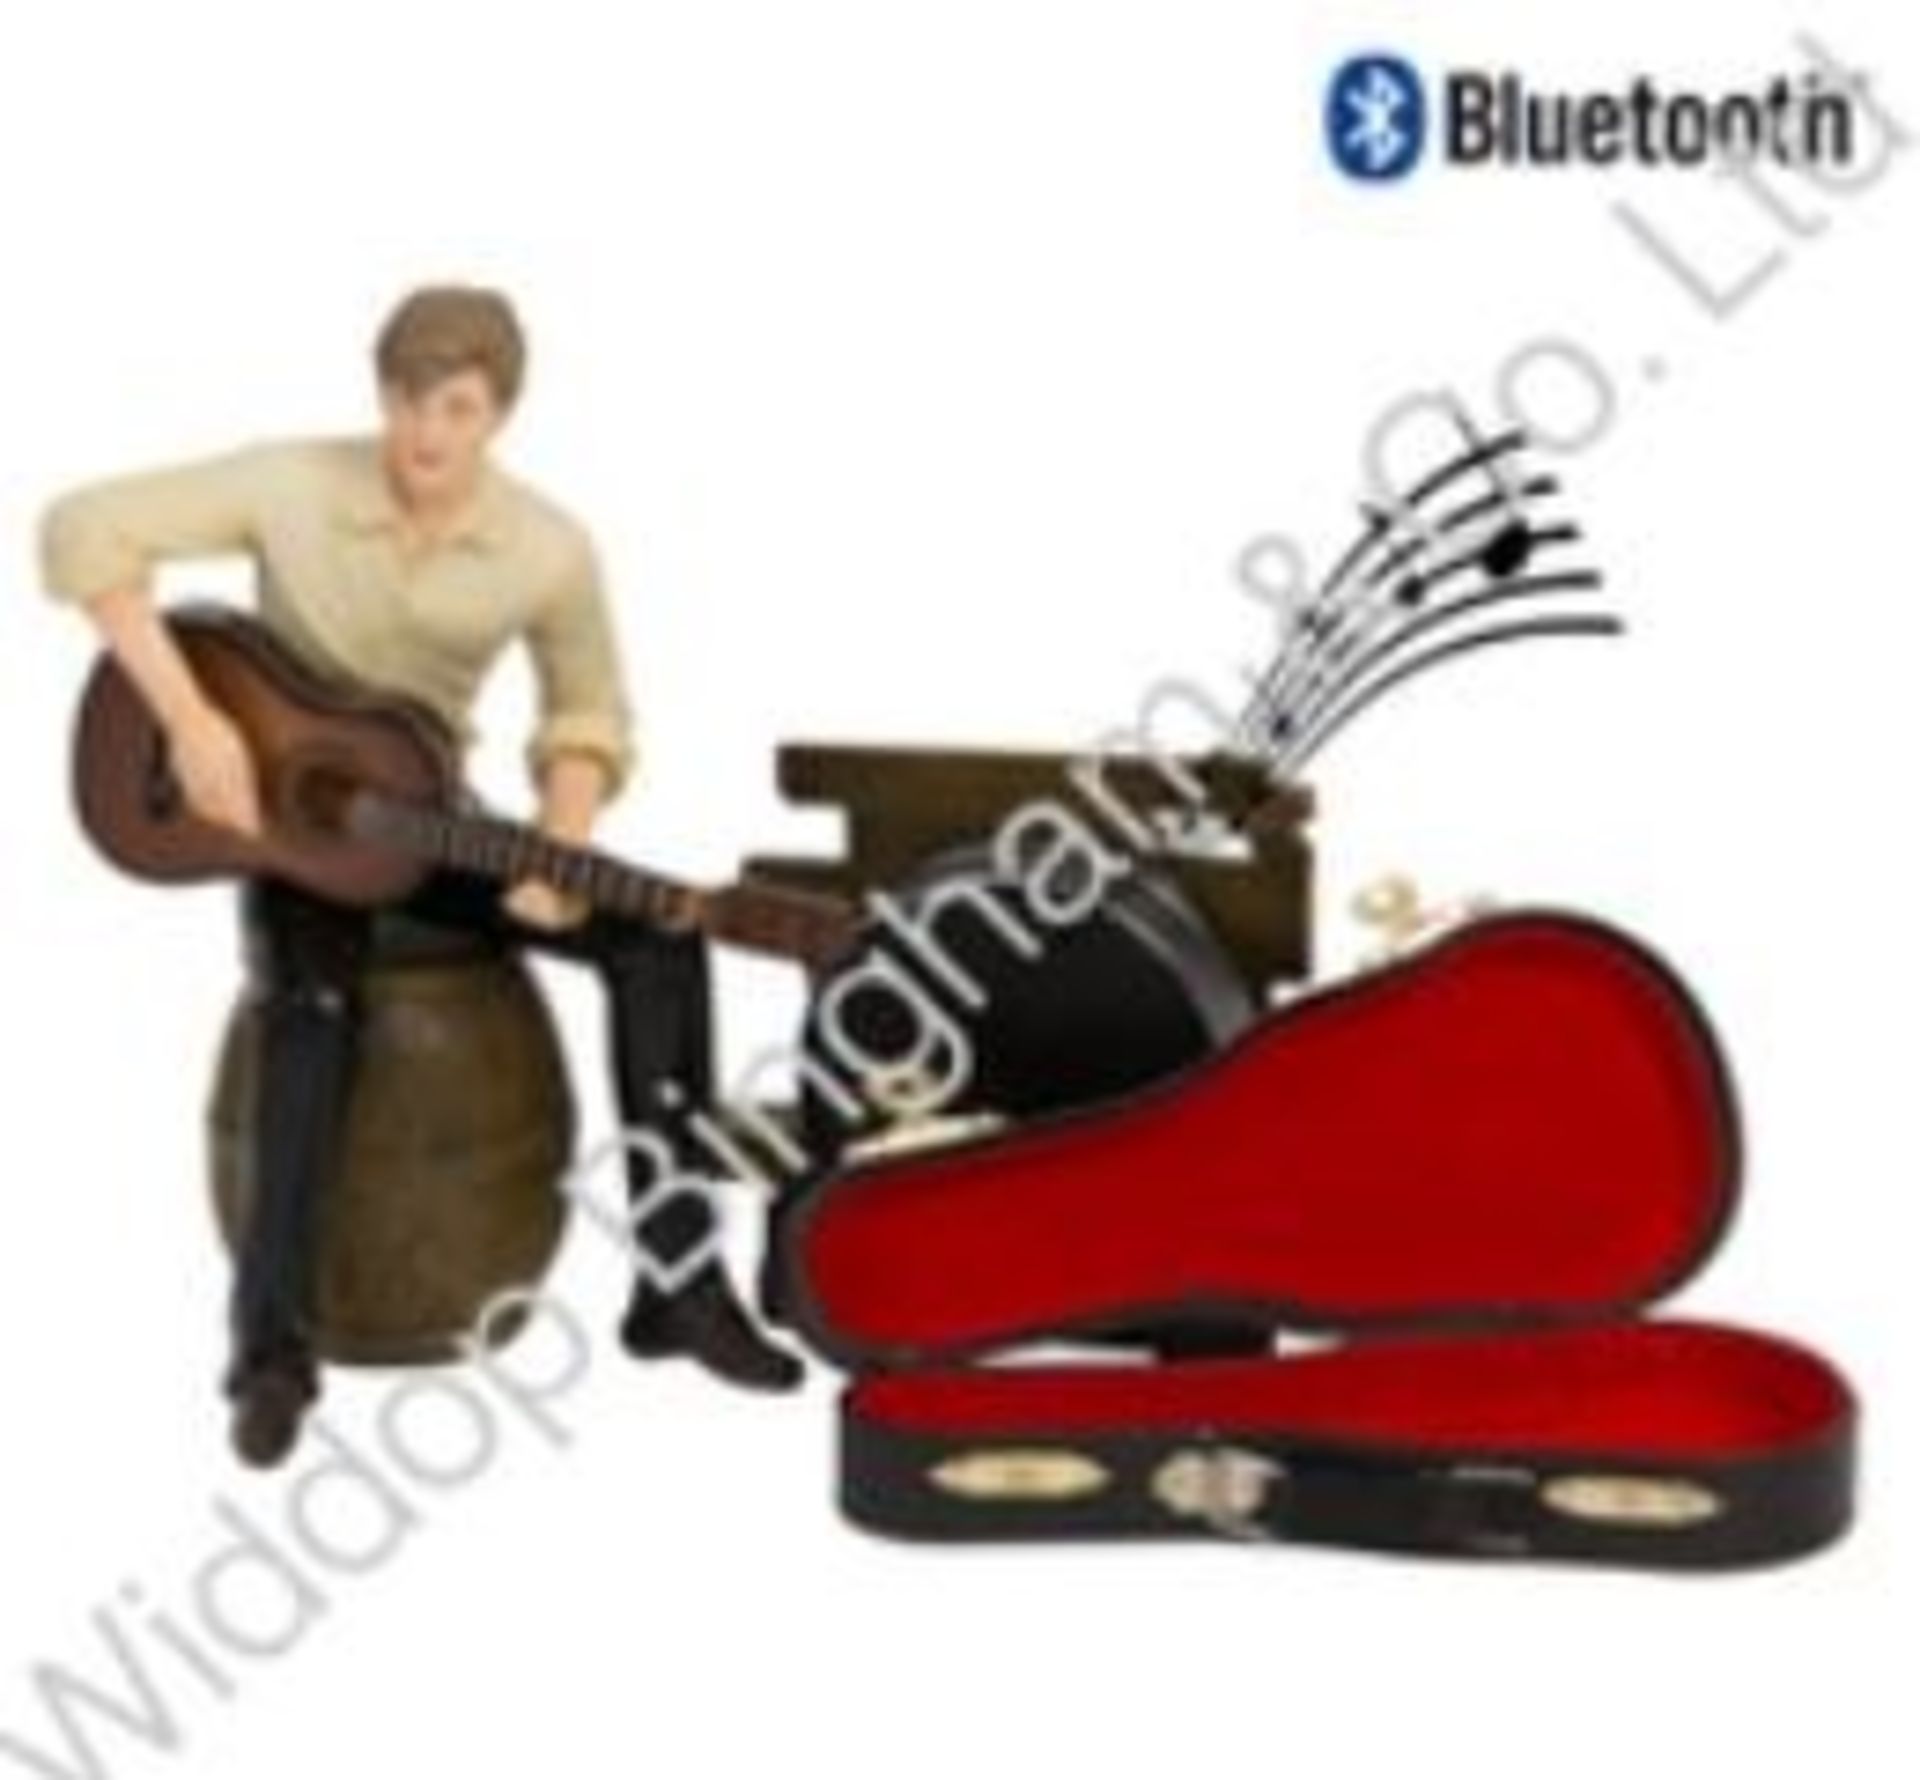 Boxed Musicology Bluetooth Speaker Man Playing Guitar Figurine RRP £90